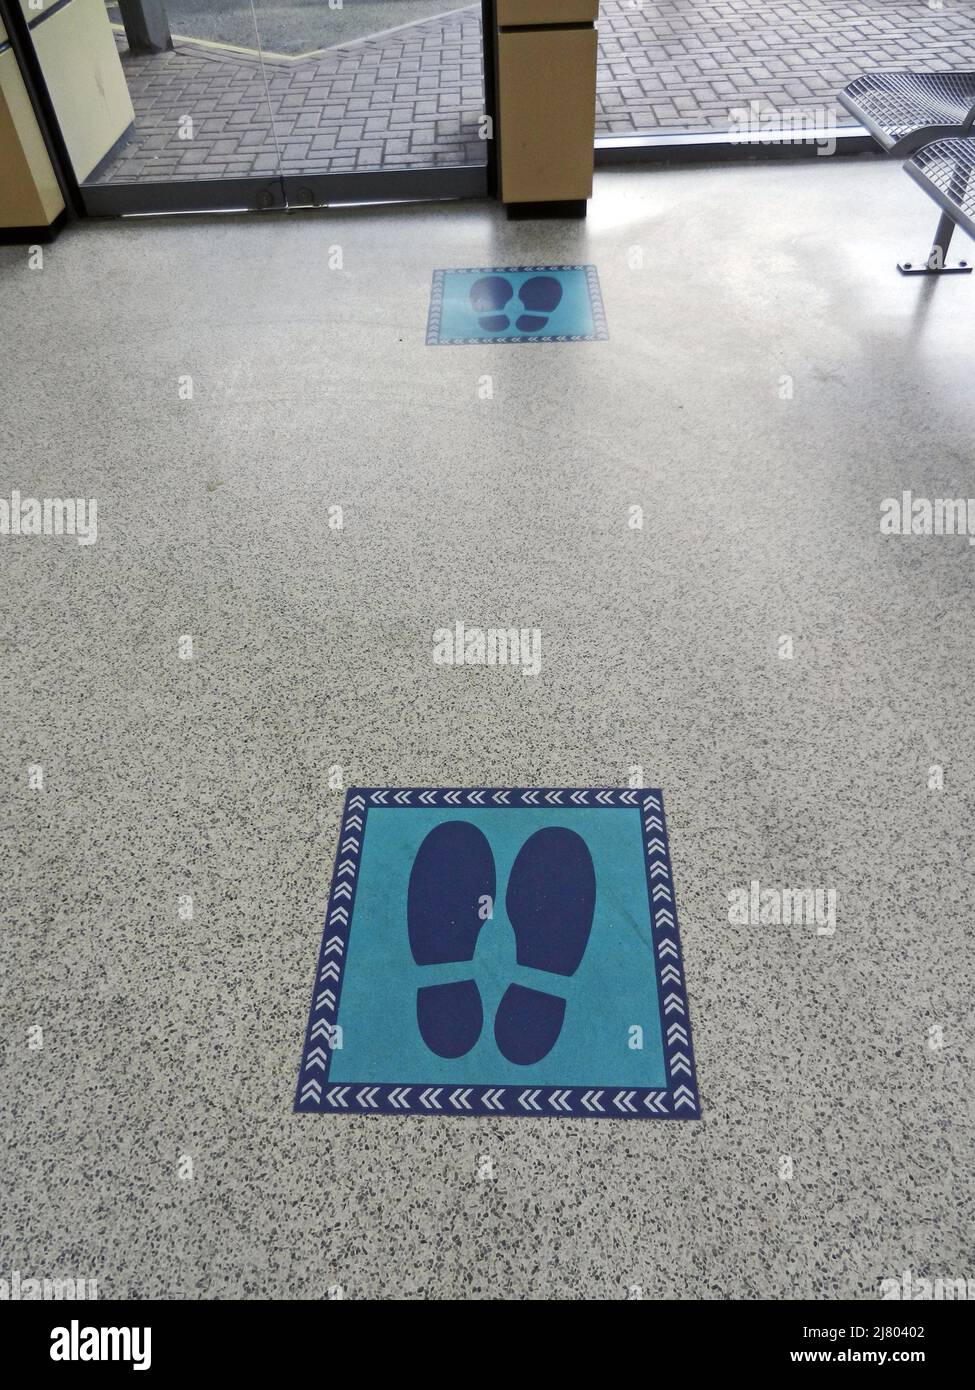 CHORLEY. LANCASHIRE. ENGLAND. 04-19-22. Social distancing markers on the floor of the bus station to aid queue control for bus boarding. Stock Photo